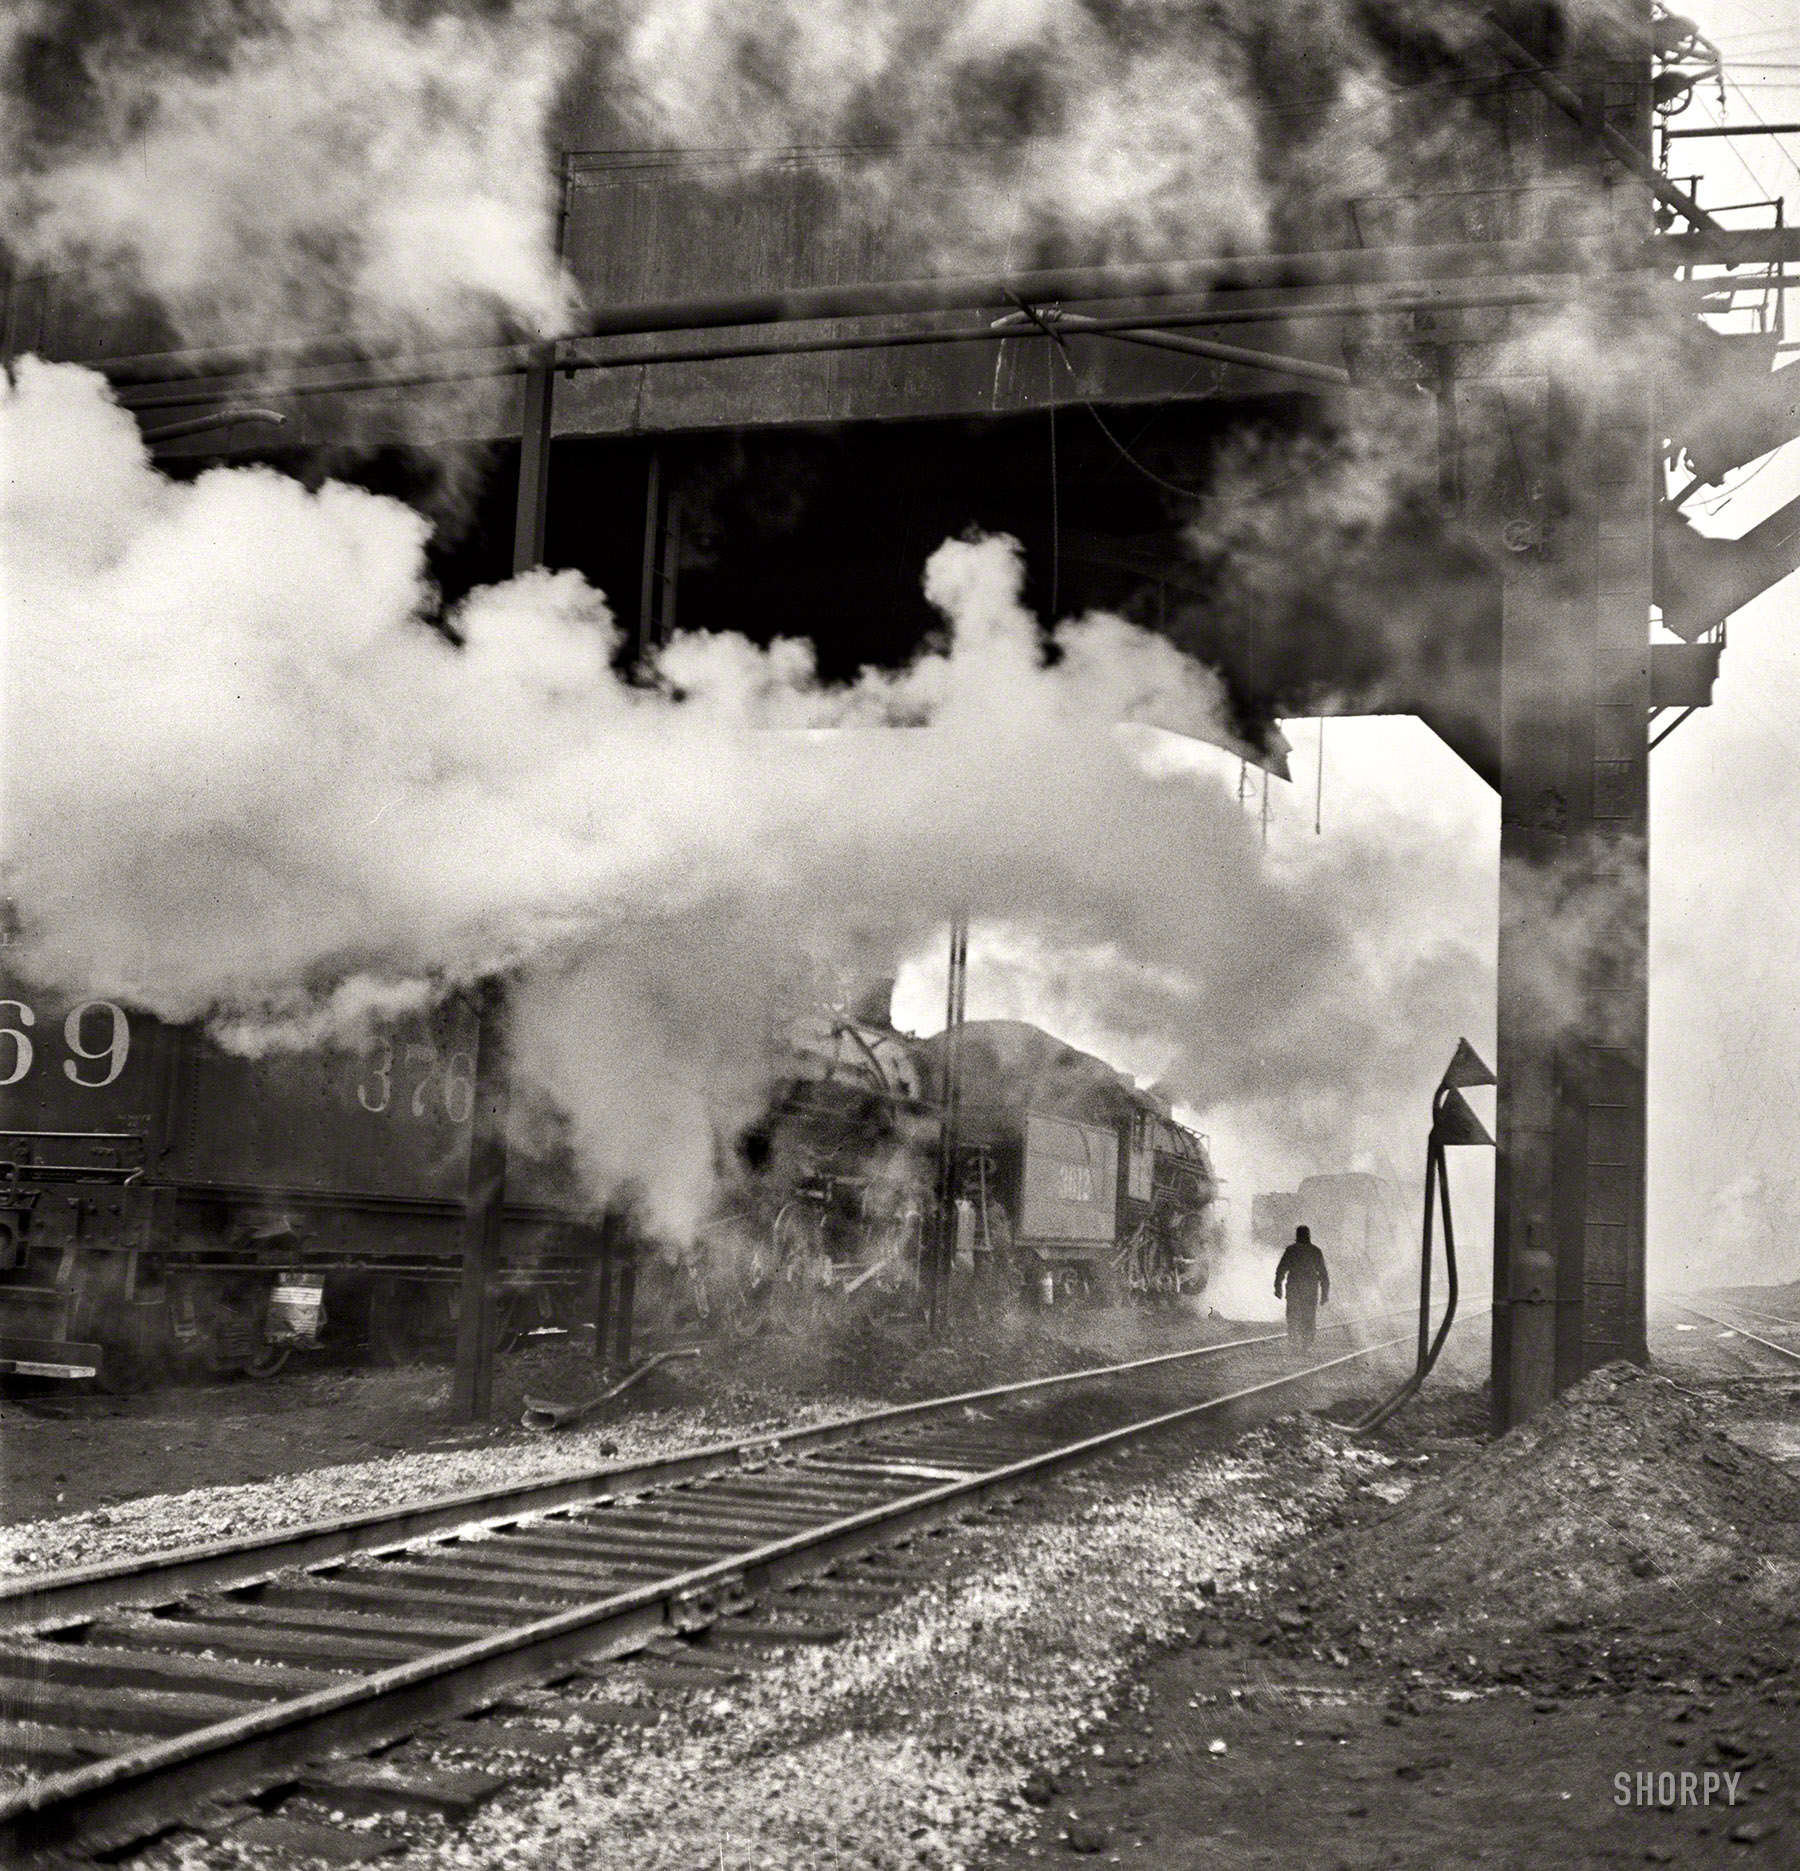 November 1942. "Chicago. Locomotives loading up with coal, water and sand at an Illinois Central Railroad yard before going out on the road." Medium-format negative by Jack Delano for the Office of War Information. View full size.